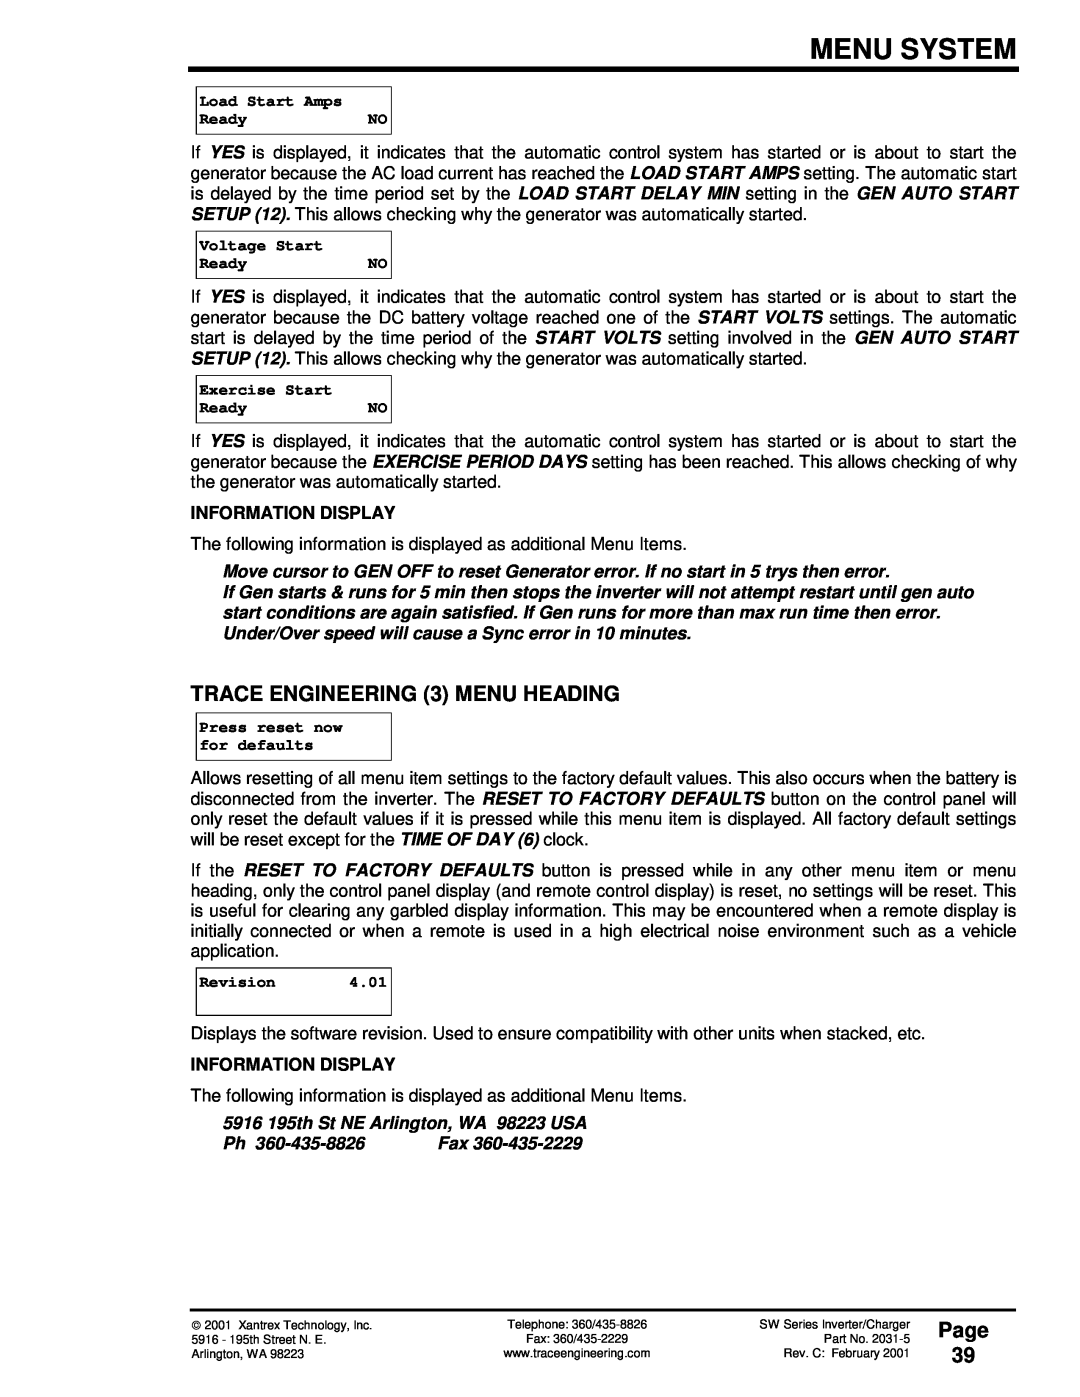 Xantrex Technology SW Series owner manual TRACE ENGINEERING 3 MENU HEADING, Page 39, Menu System, Information Display 